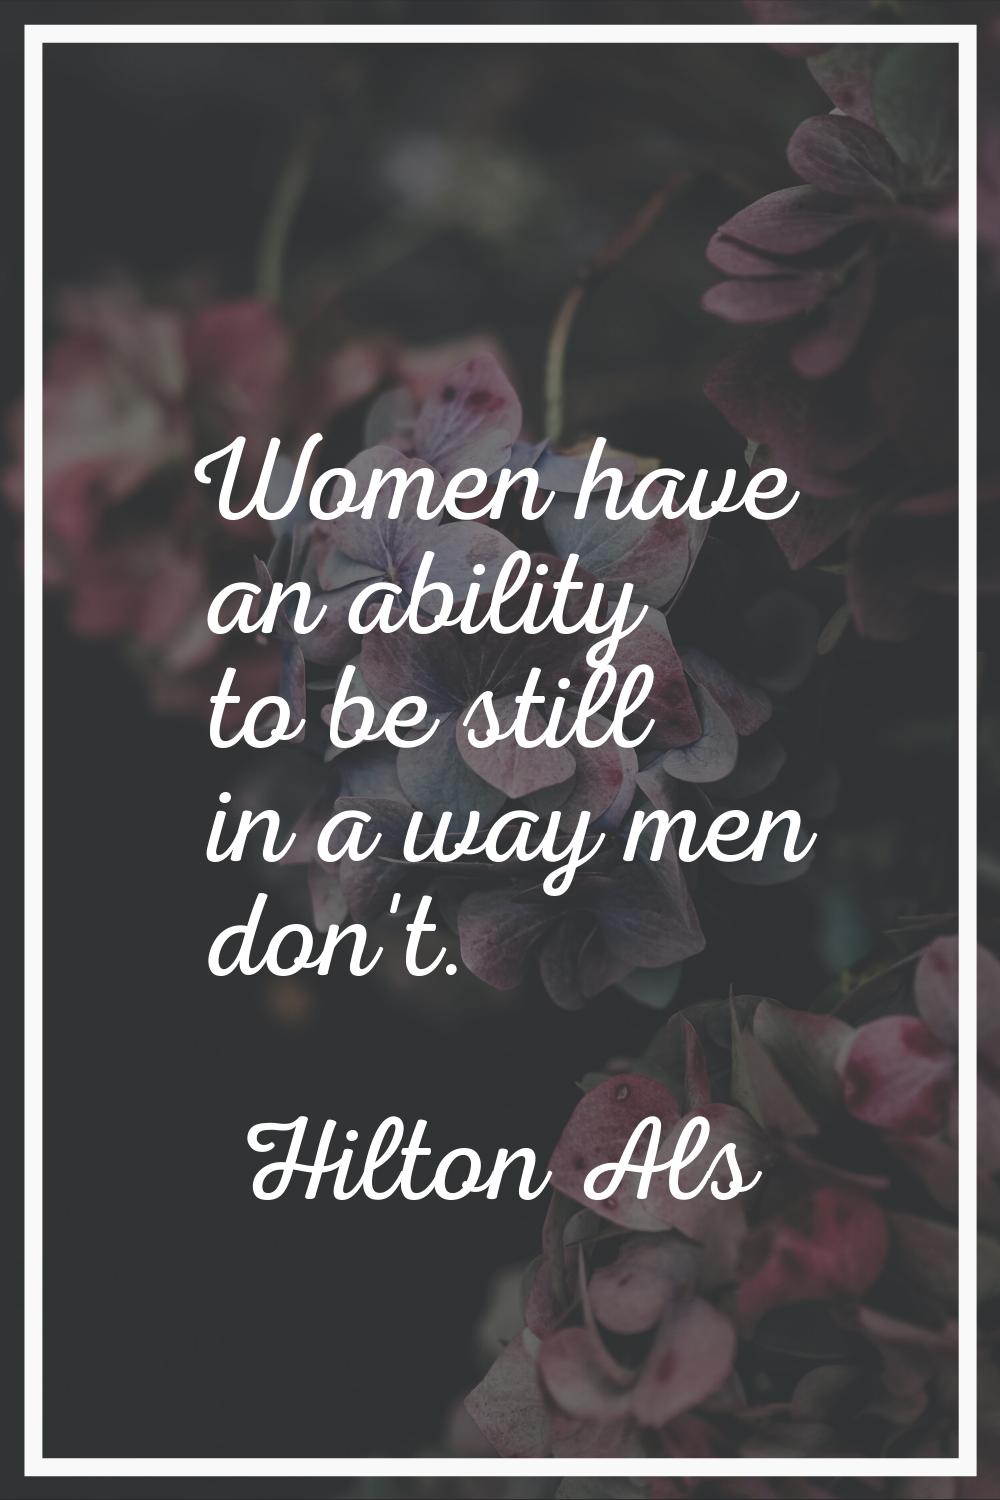 Women have an ability to be still in a way men don't.